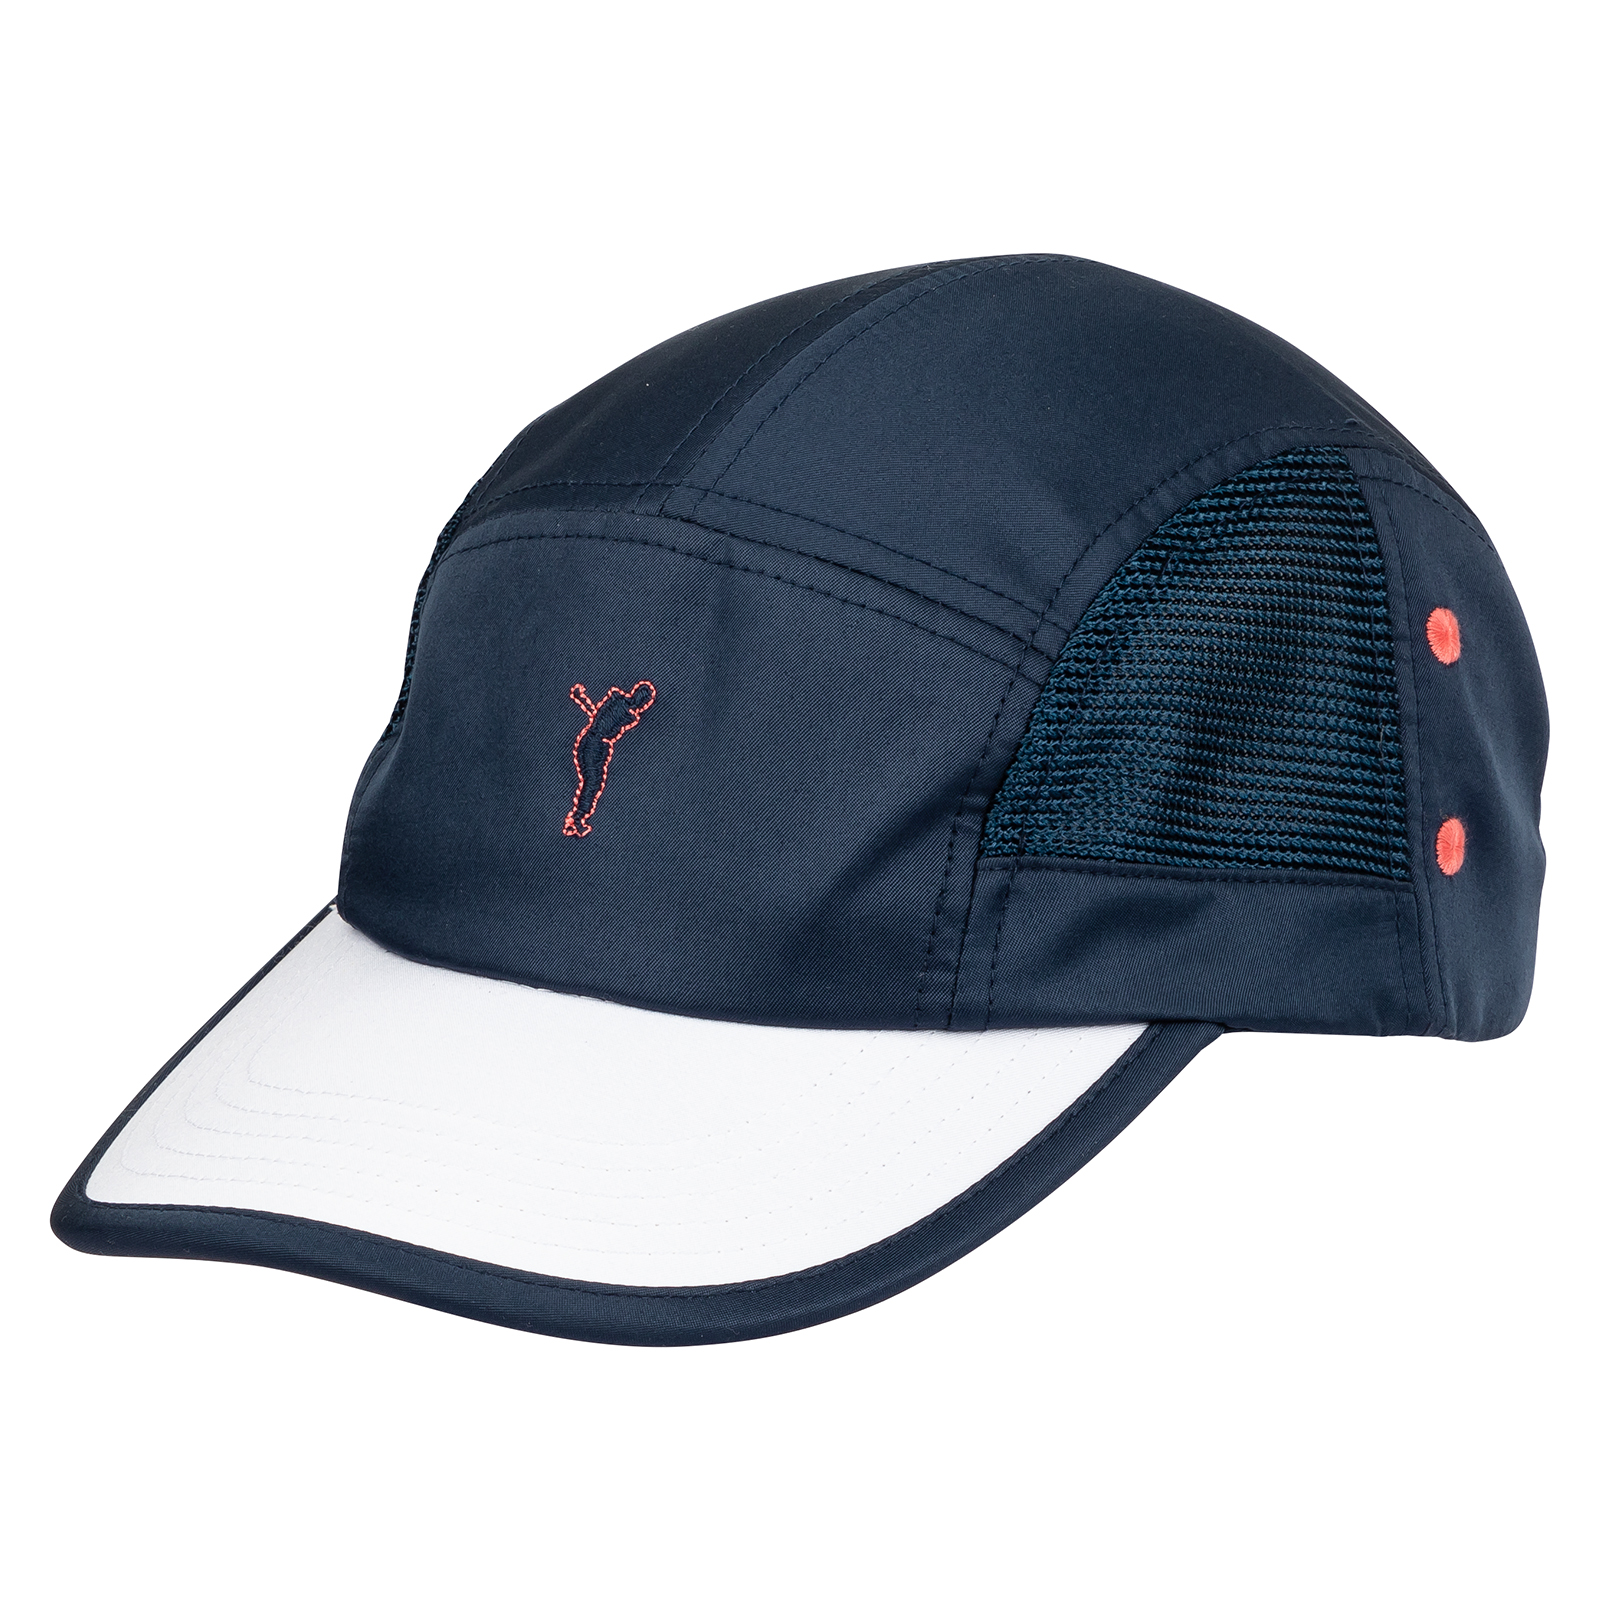 Men's golf baseball cap with contrasting elements 